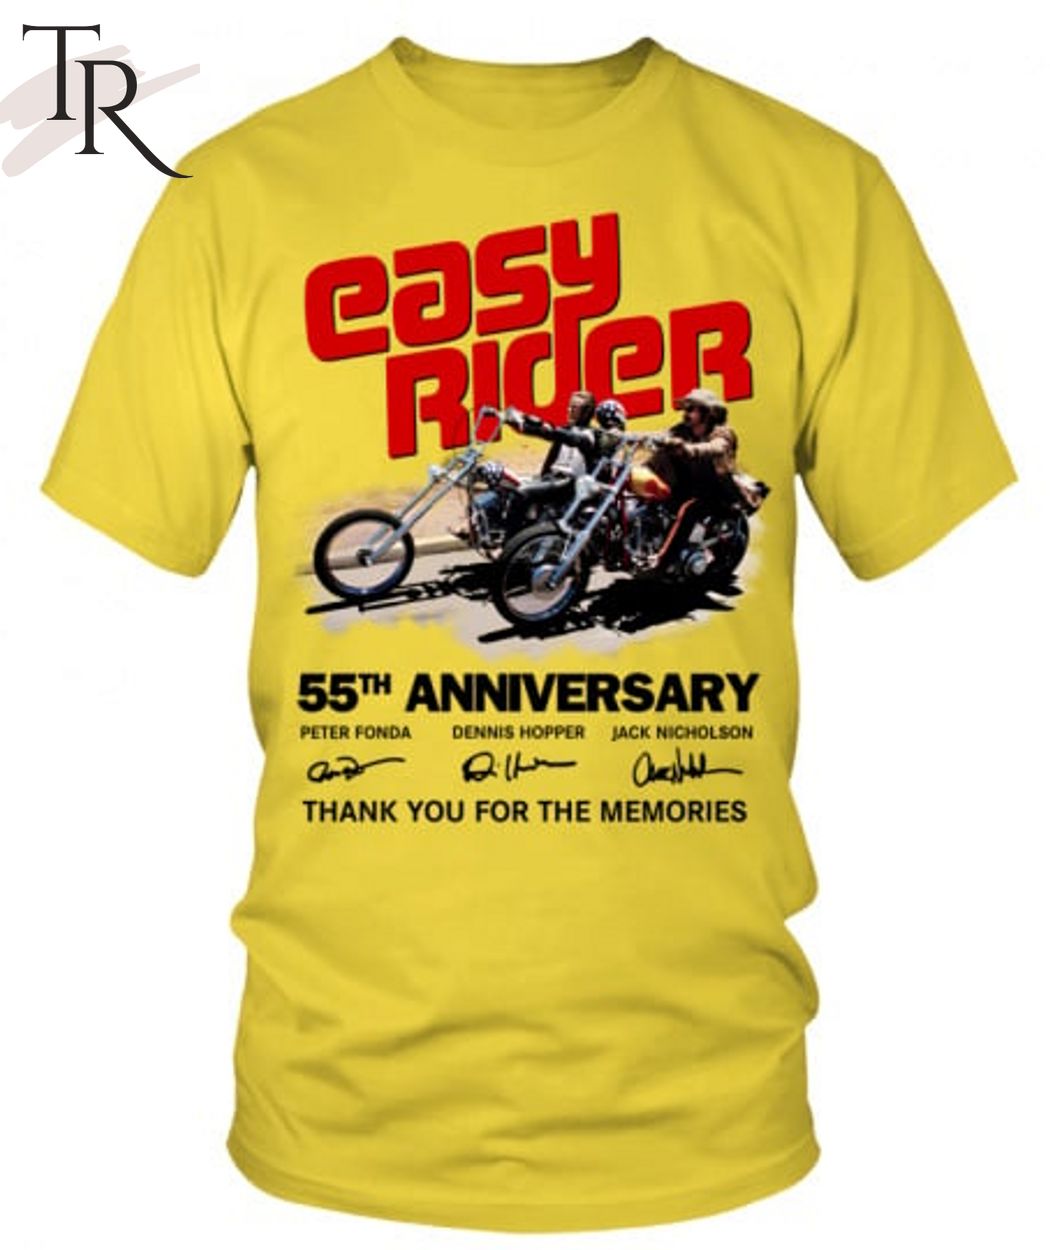 https://images.torunstyle.com/wp-content/uploads/2023/10/10063625/easy-rider-55th-anniversary-thank-you-for-the-memories-t-shirt-1-SNTBb.jpg